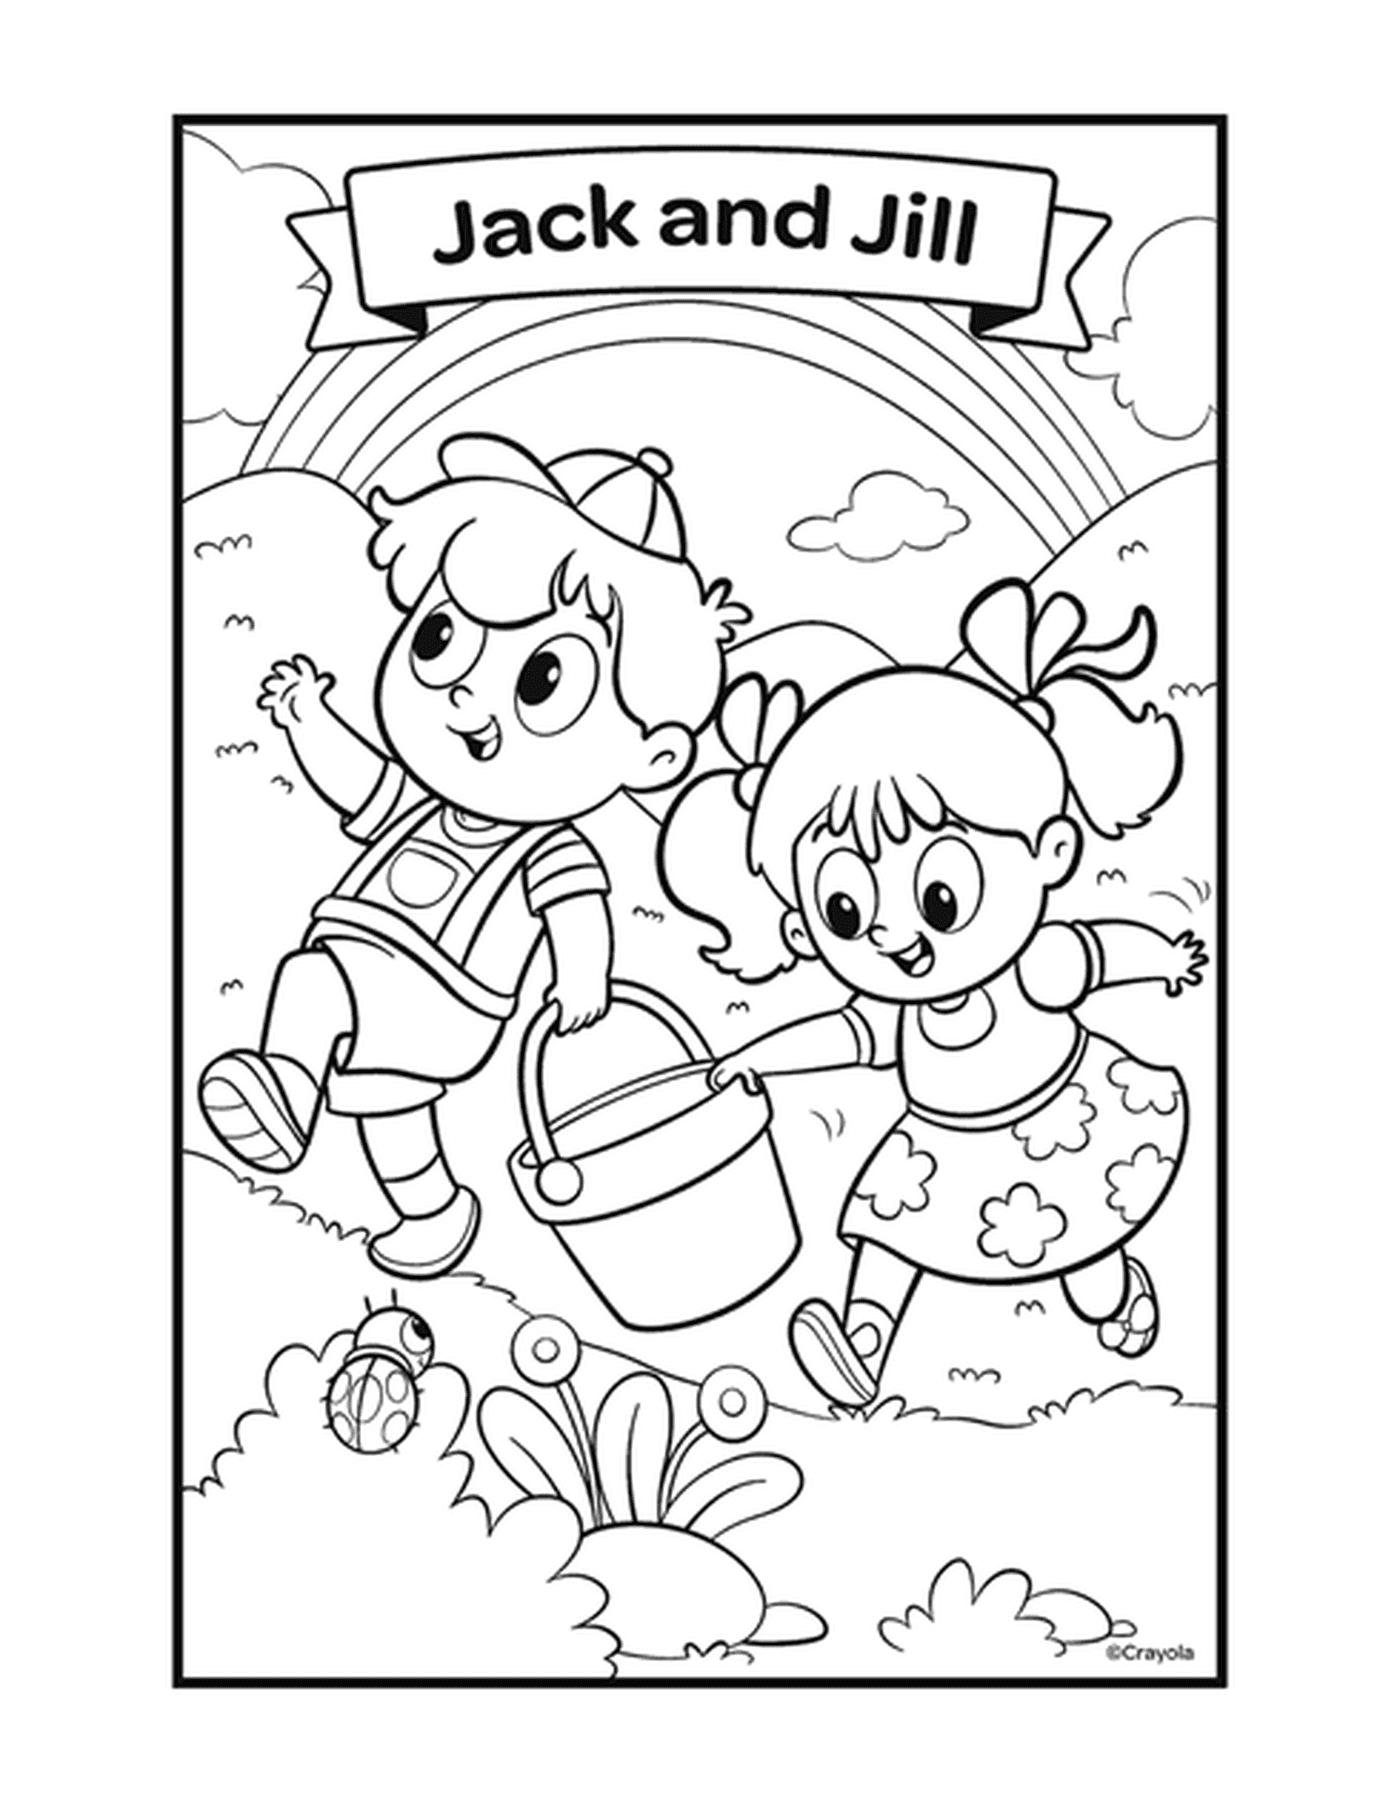  Jack and Jill with two children playing with a bucket 